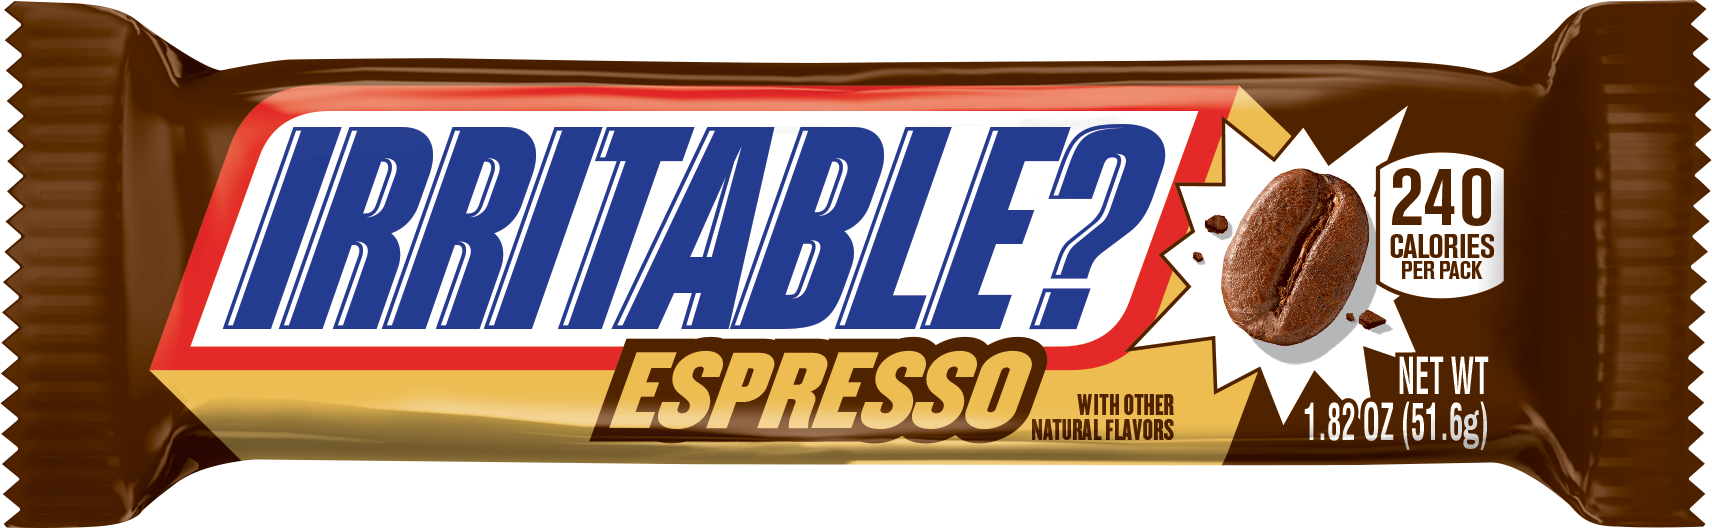 Snickers Irritable - Espresso - Snickers Sweet And Salty (1712x528)